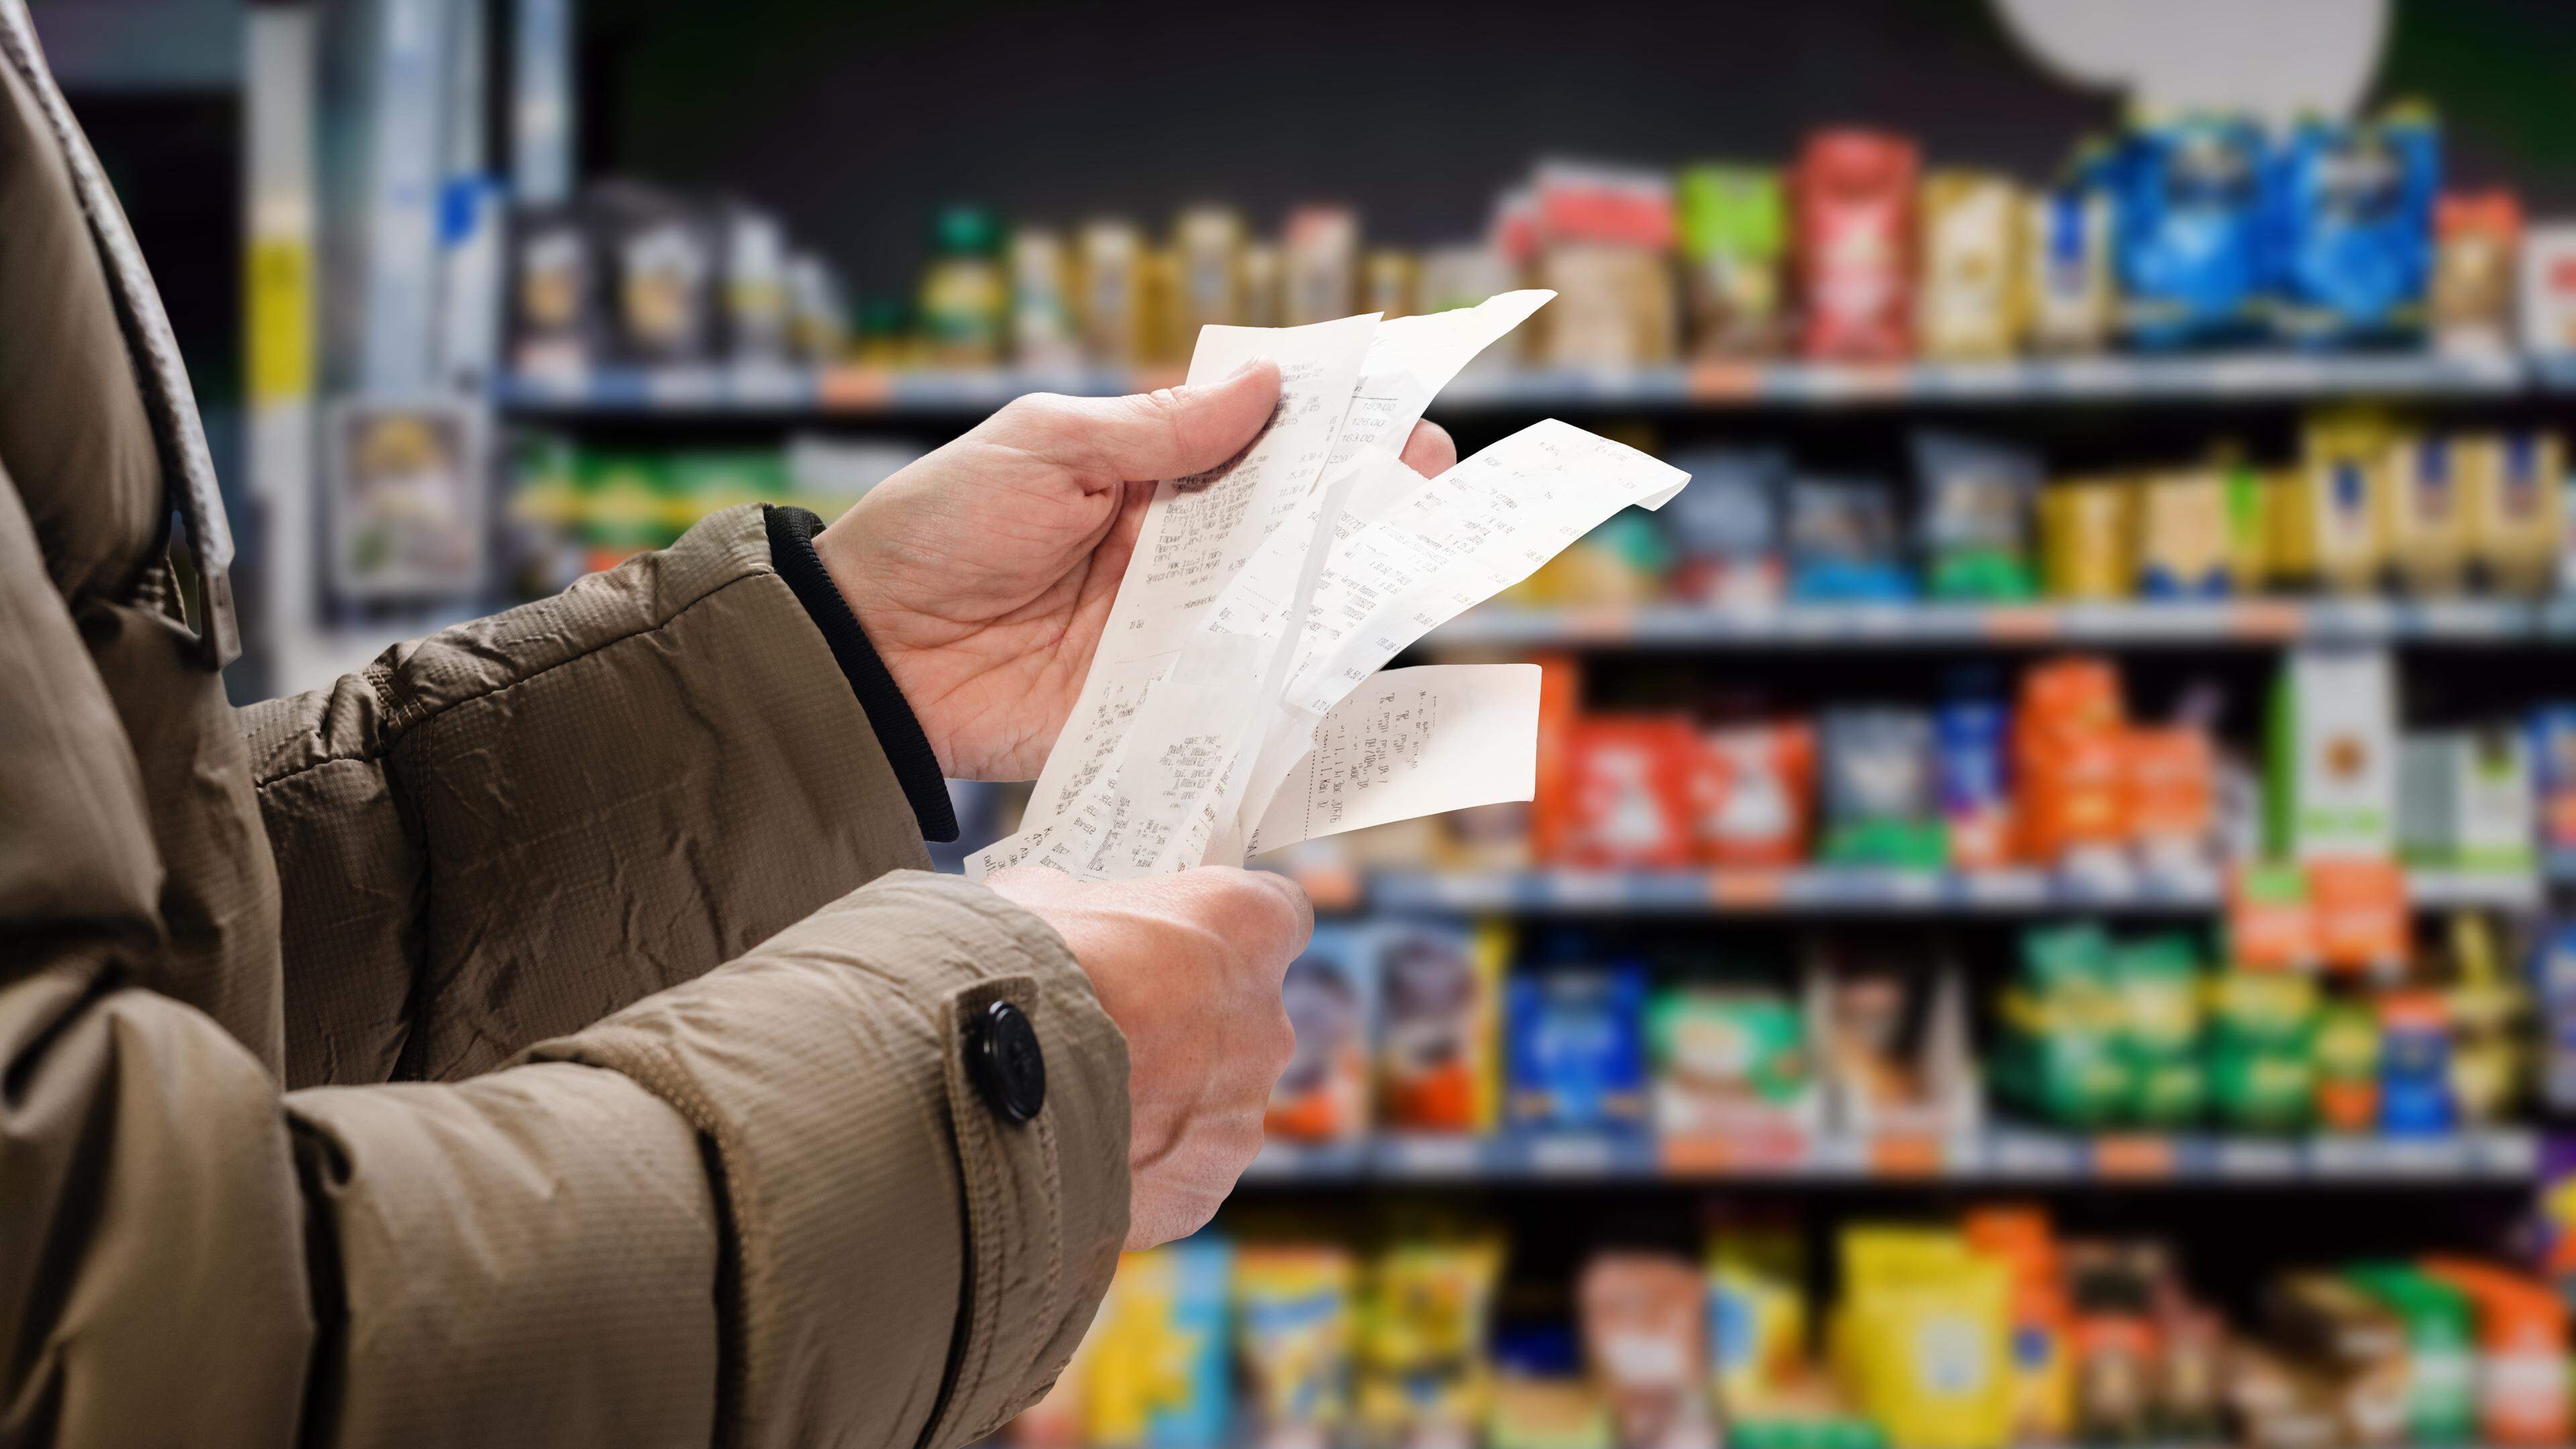 A stock photo of a man viewing receipts in supermarket.